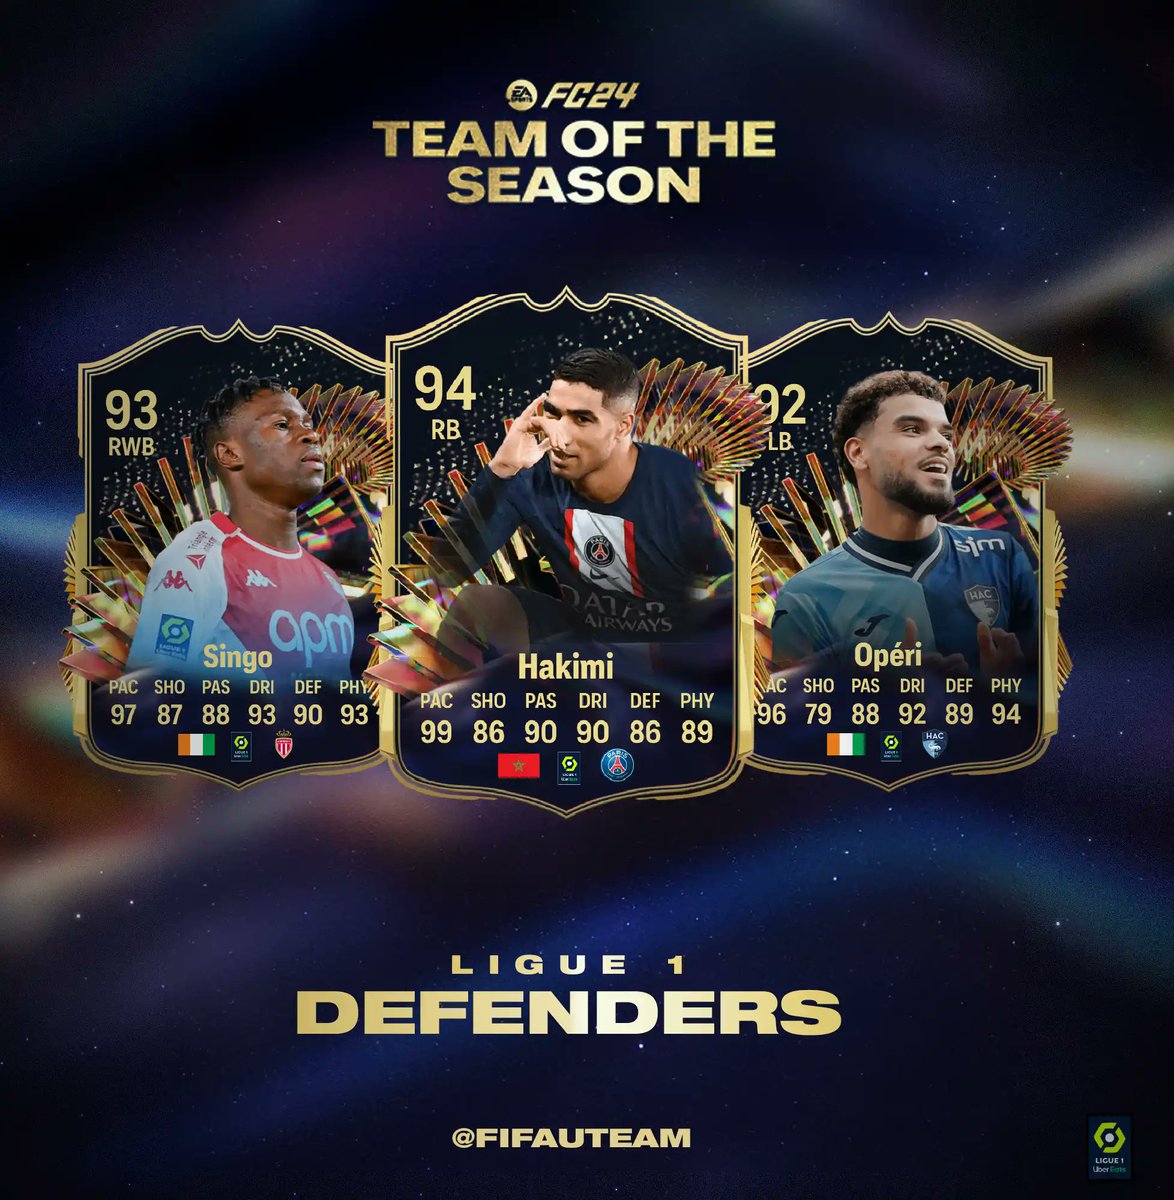 📣 Get ready to cast your vote and make a difference! Vote now for the Ligue 1 Defenders of the season!
#FC24 #TOTS #TeamOfTheSeason #Ligue1
fifauteam.com/vote-ligue-1-t…